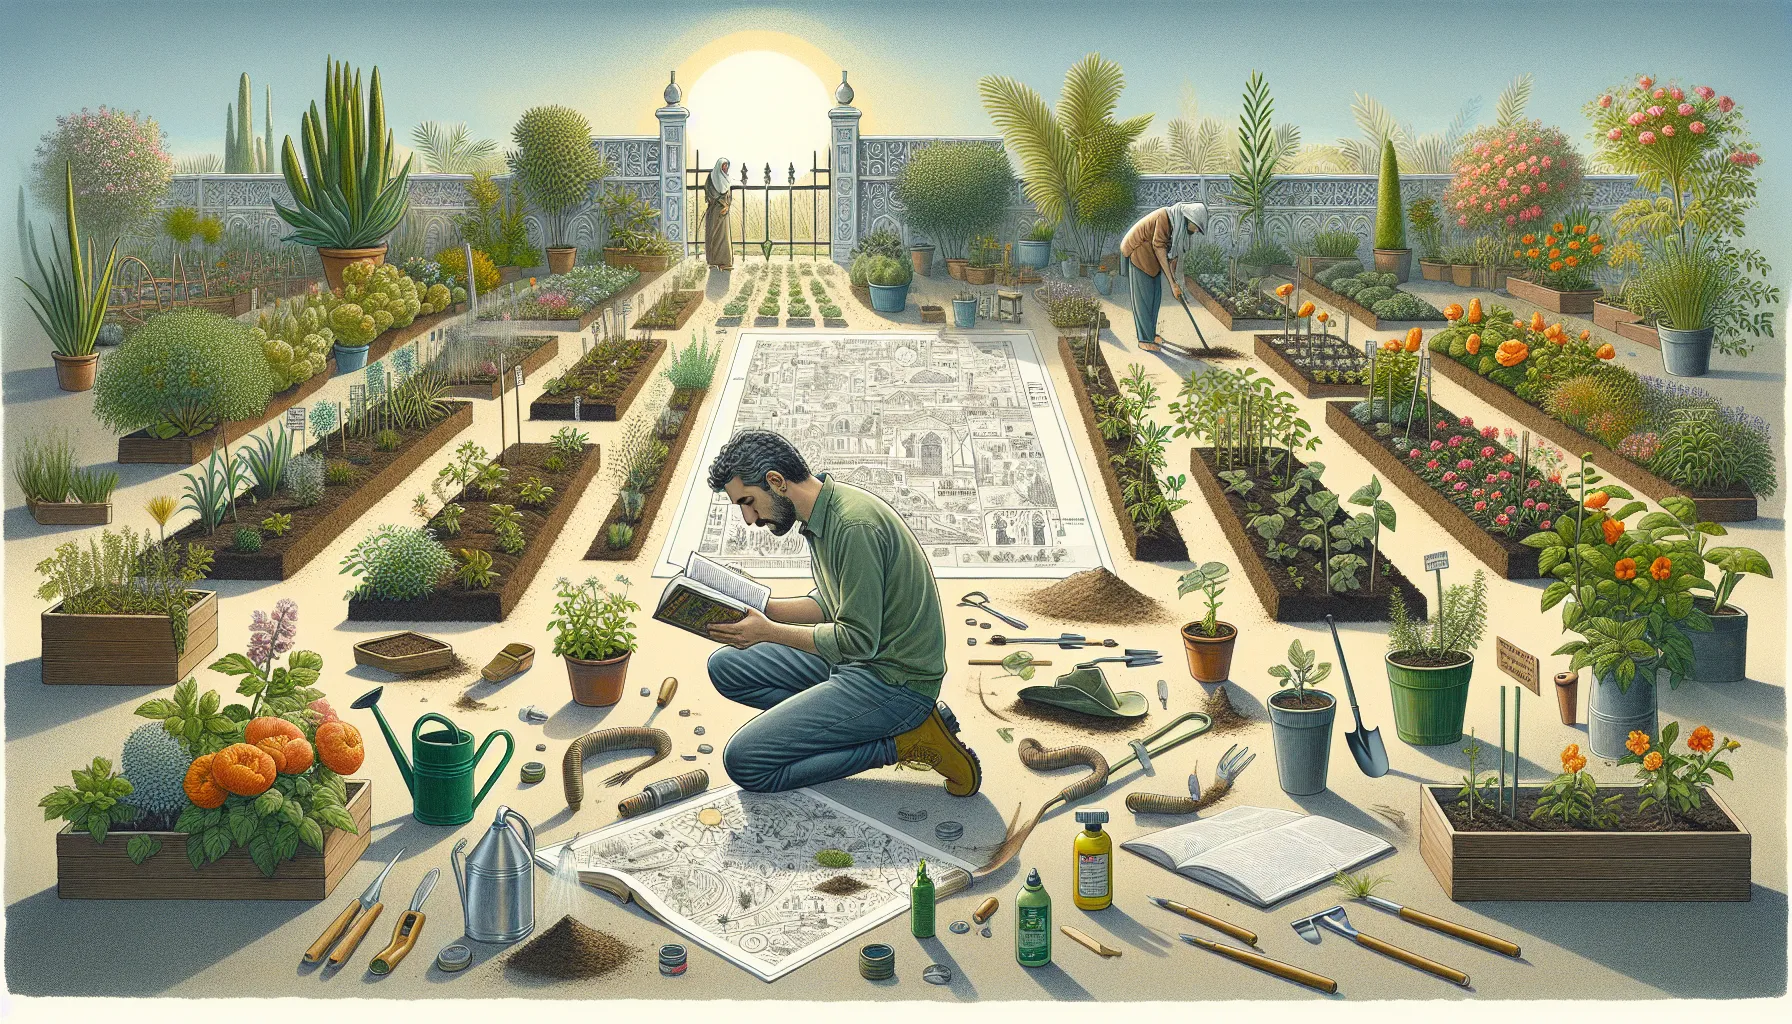 An illustration showing a person kneeling and reading a book about the basics of gardening, surrounded by plants, garden tools, and sketches of garden layouts.